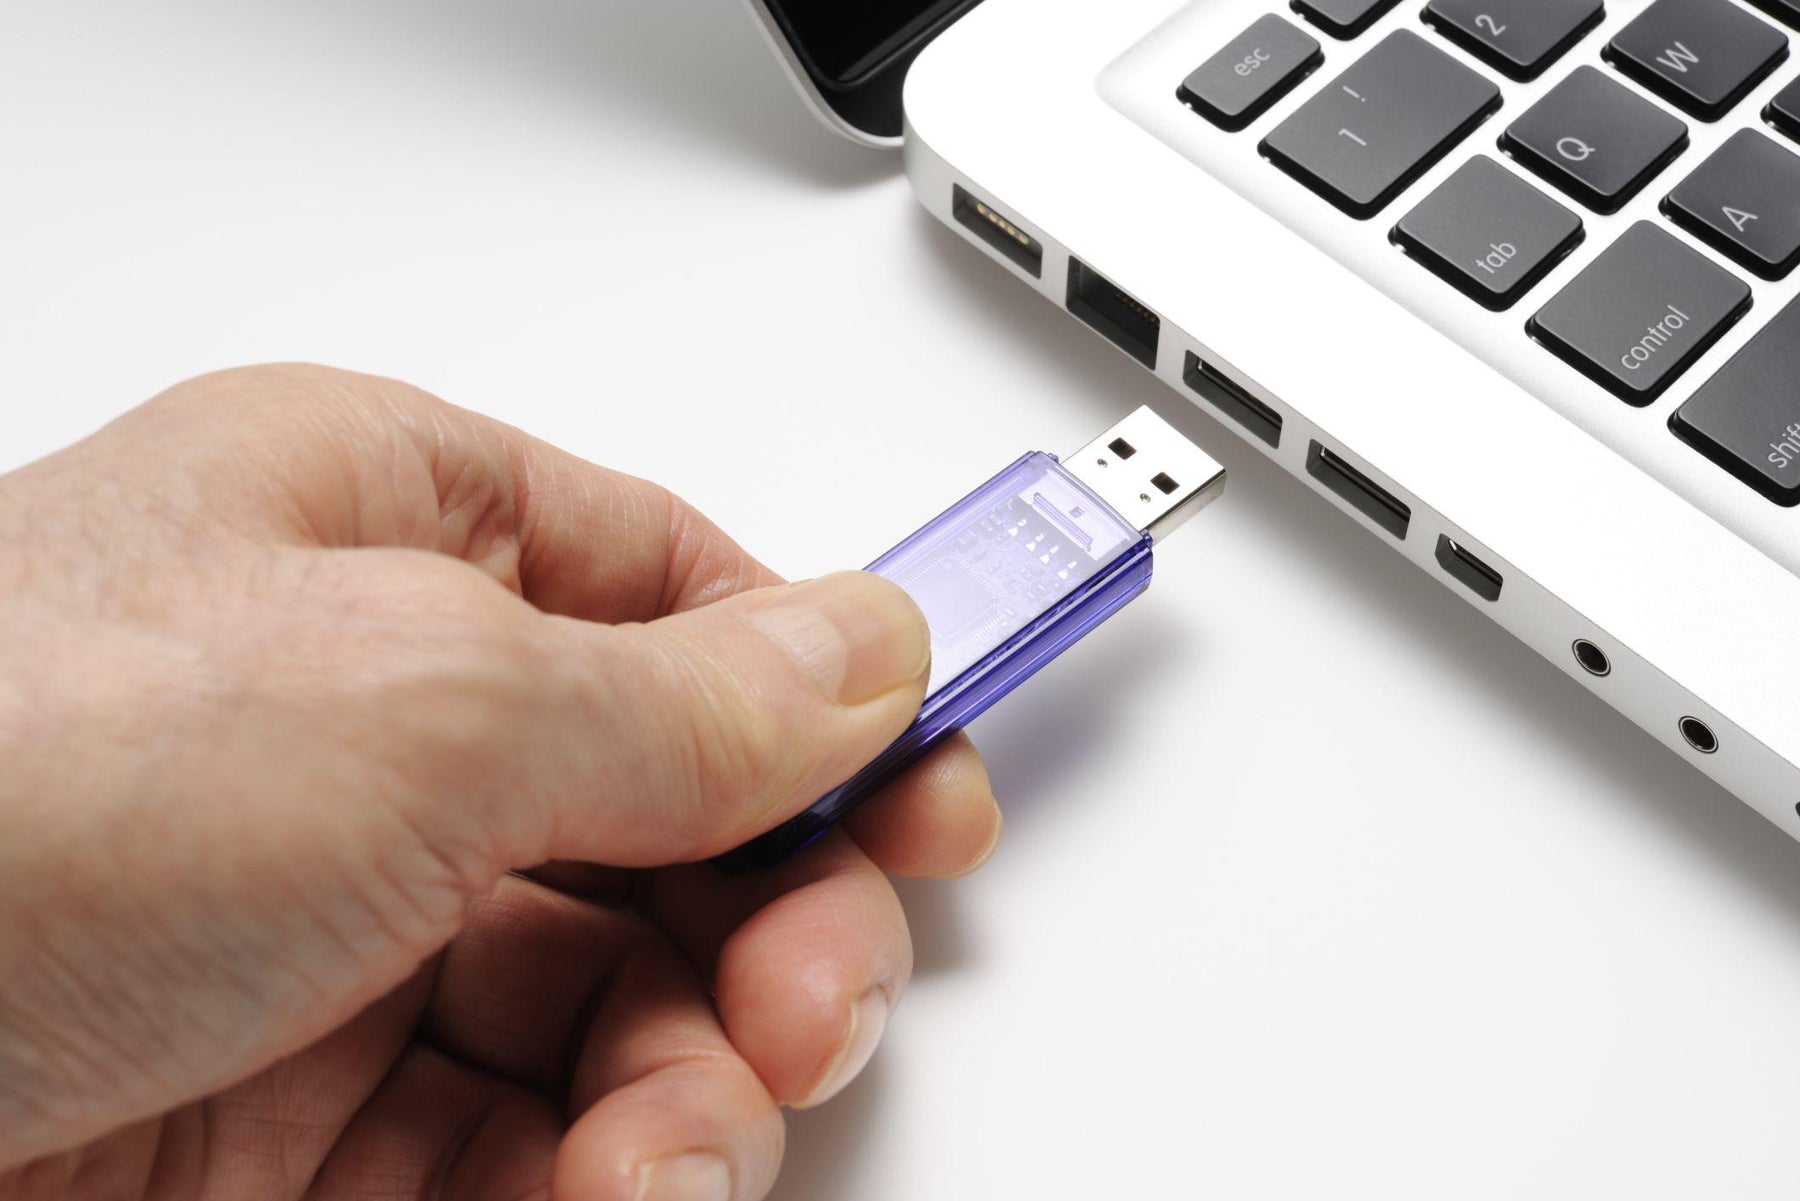 Looking for Some Useful Things to Do with Spare Flash Drives? Here Are Some Ideas - Macfixit Australia